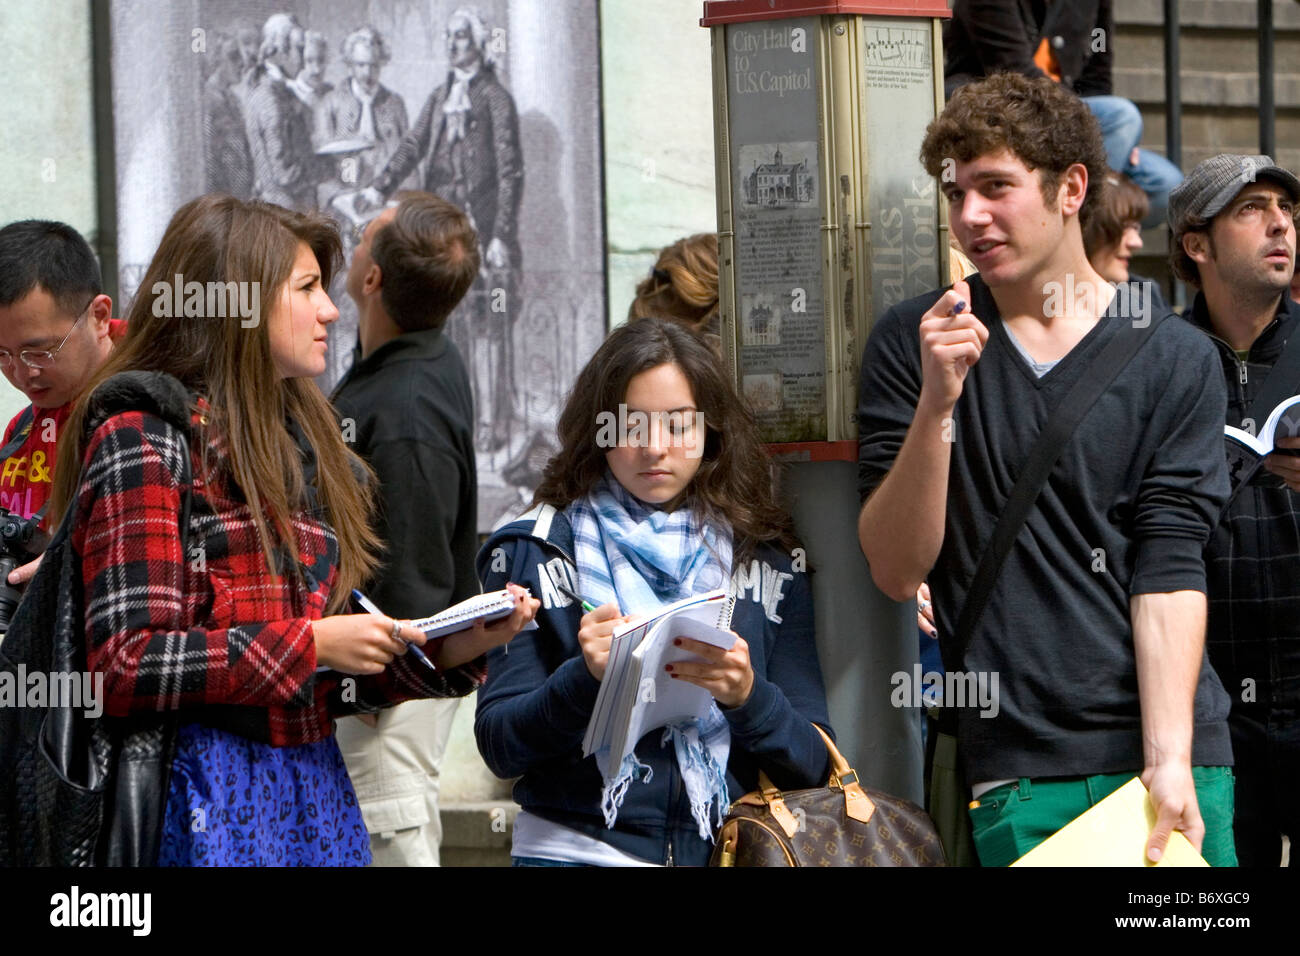 Students taking notes in front of the Federal Hall on 26 Wall Street in New York City New York USA Stock Photo